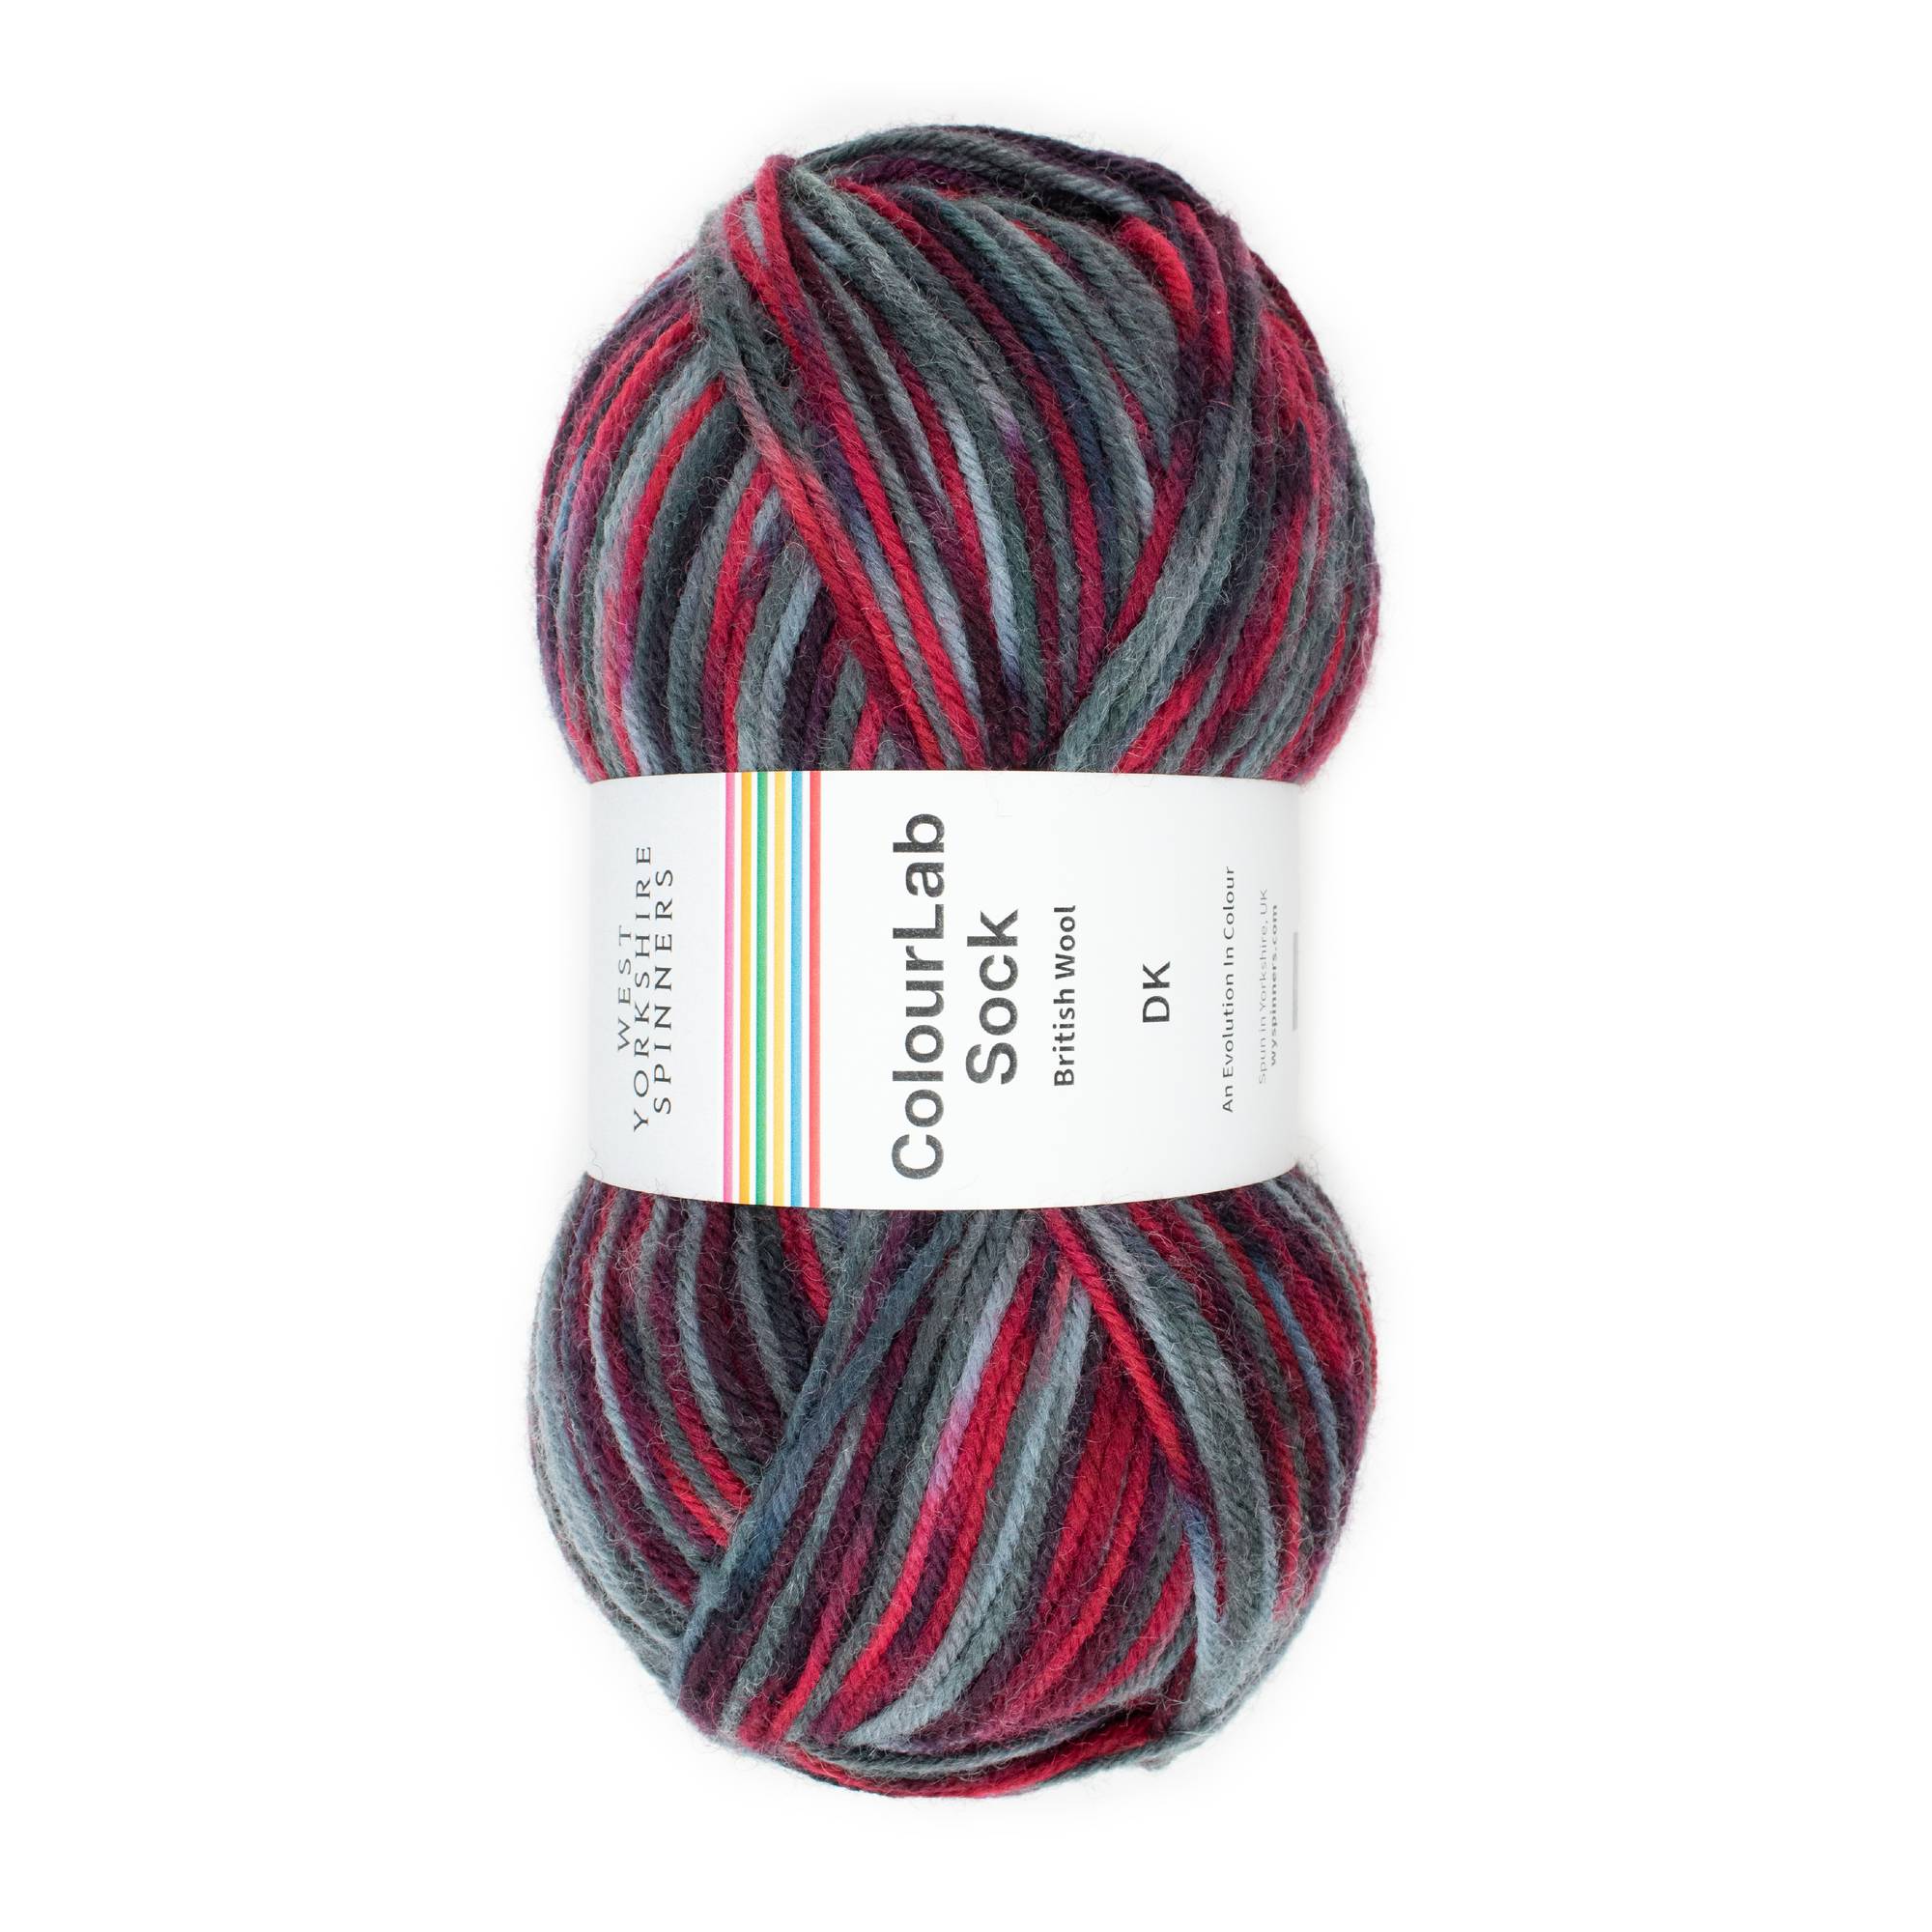 West Yorkshire Spinners Rock ColourLab Sock DK 150g